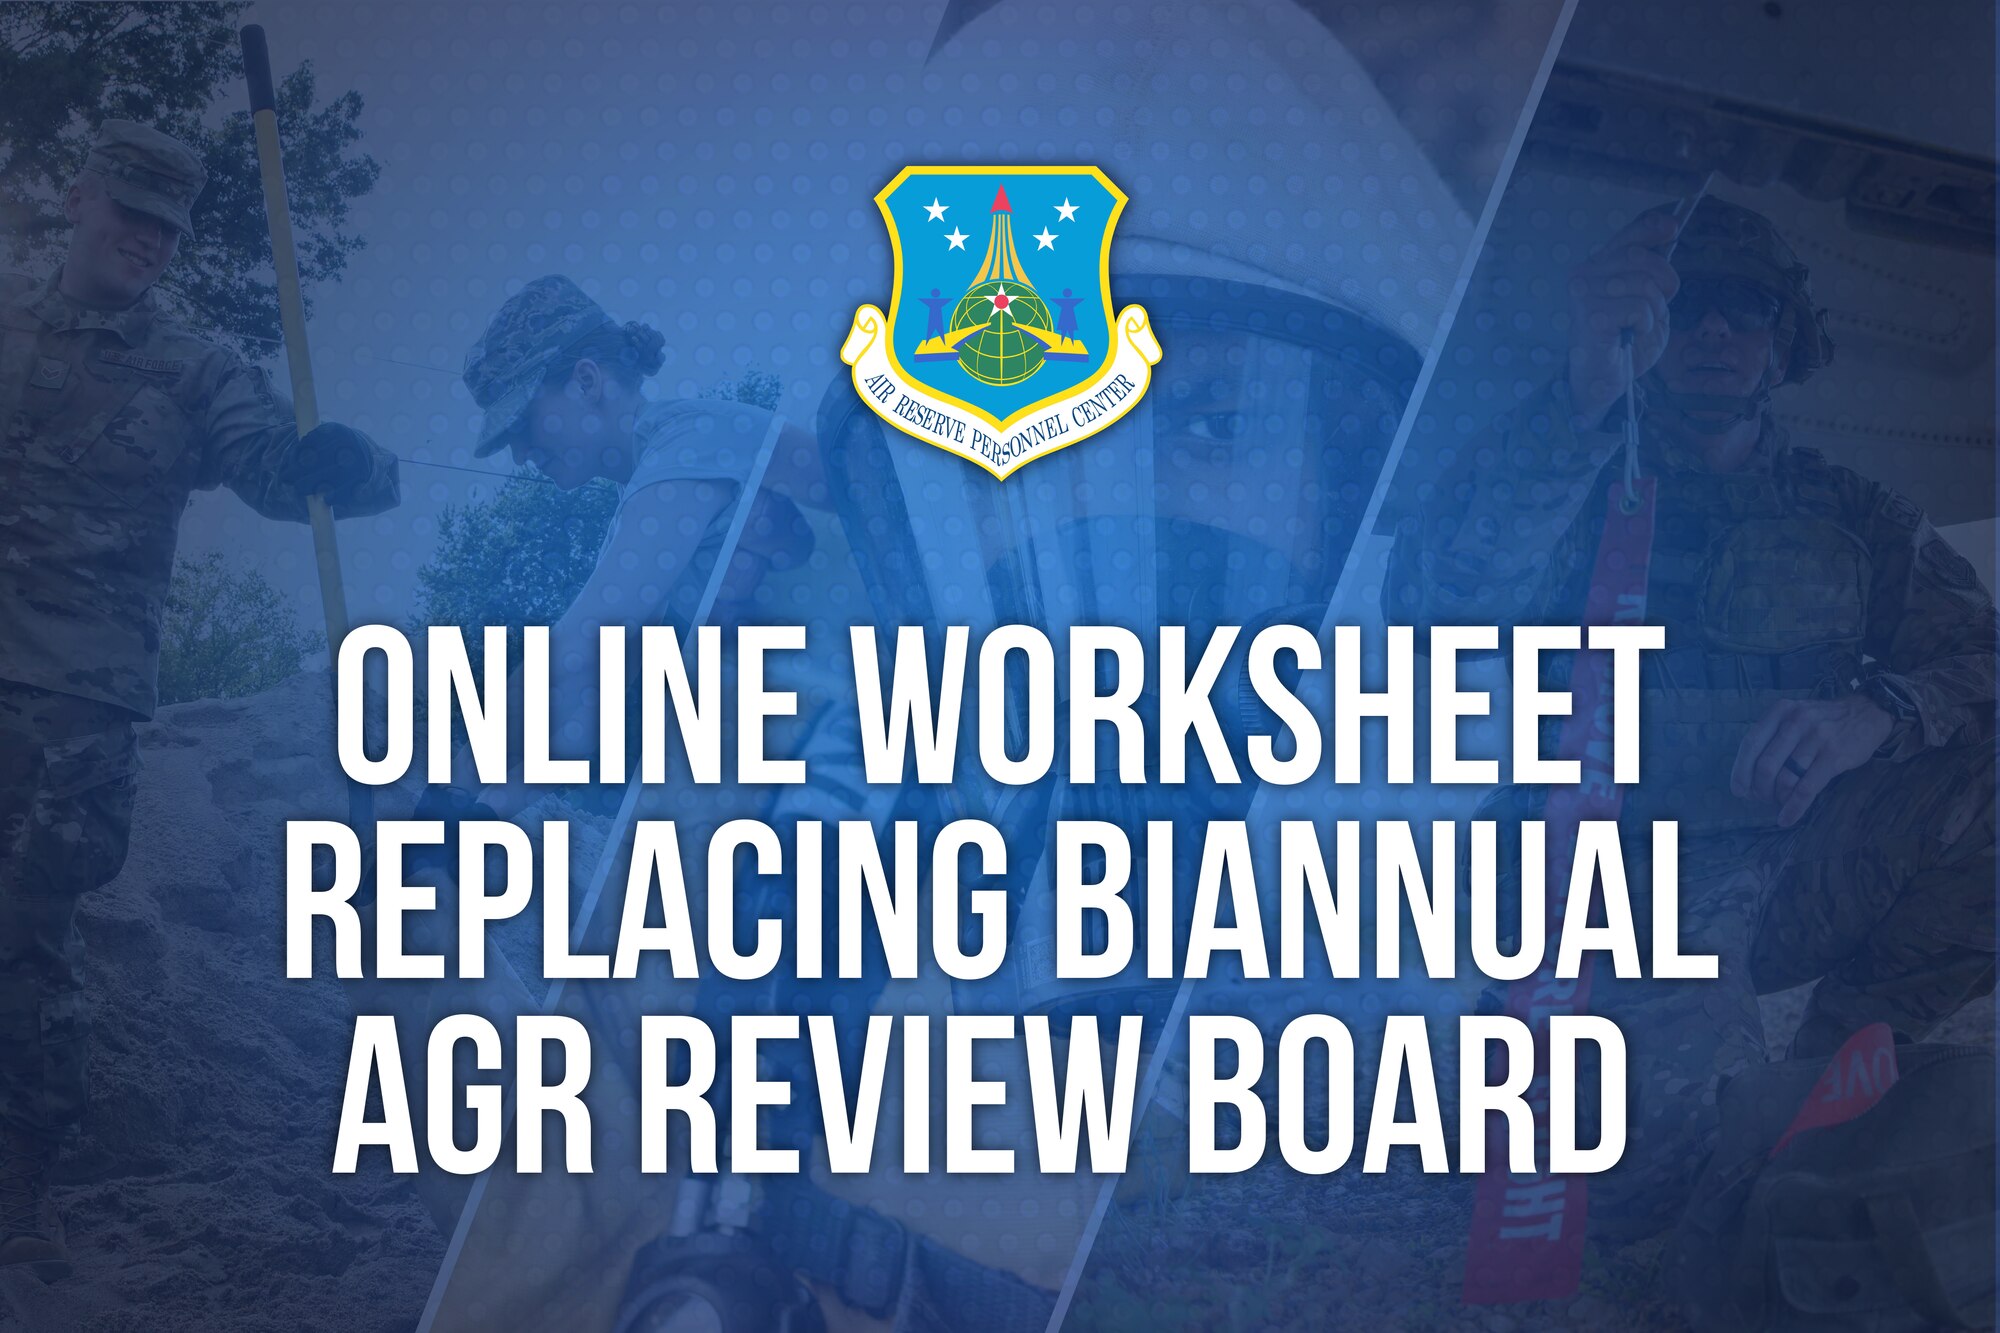 Online Worksheet To Replace Biannual AGR Review Board Air University AU Air University News